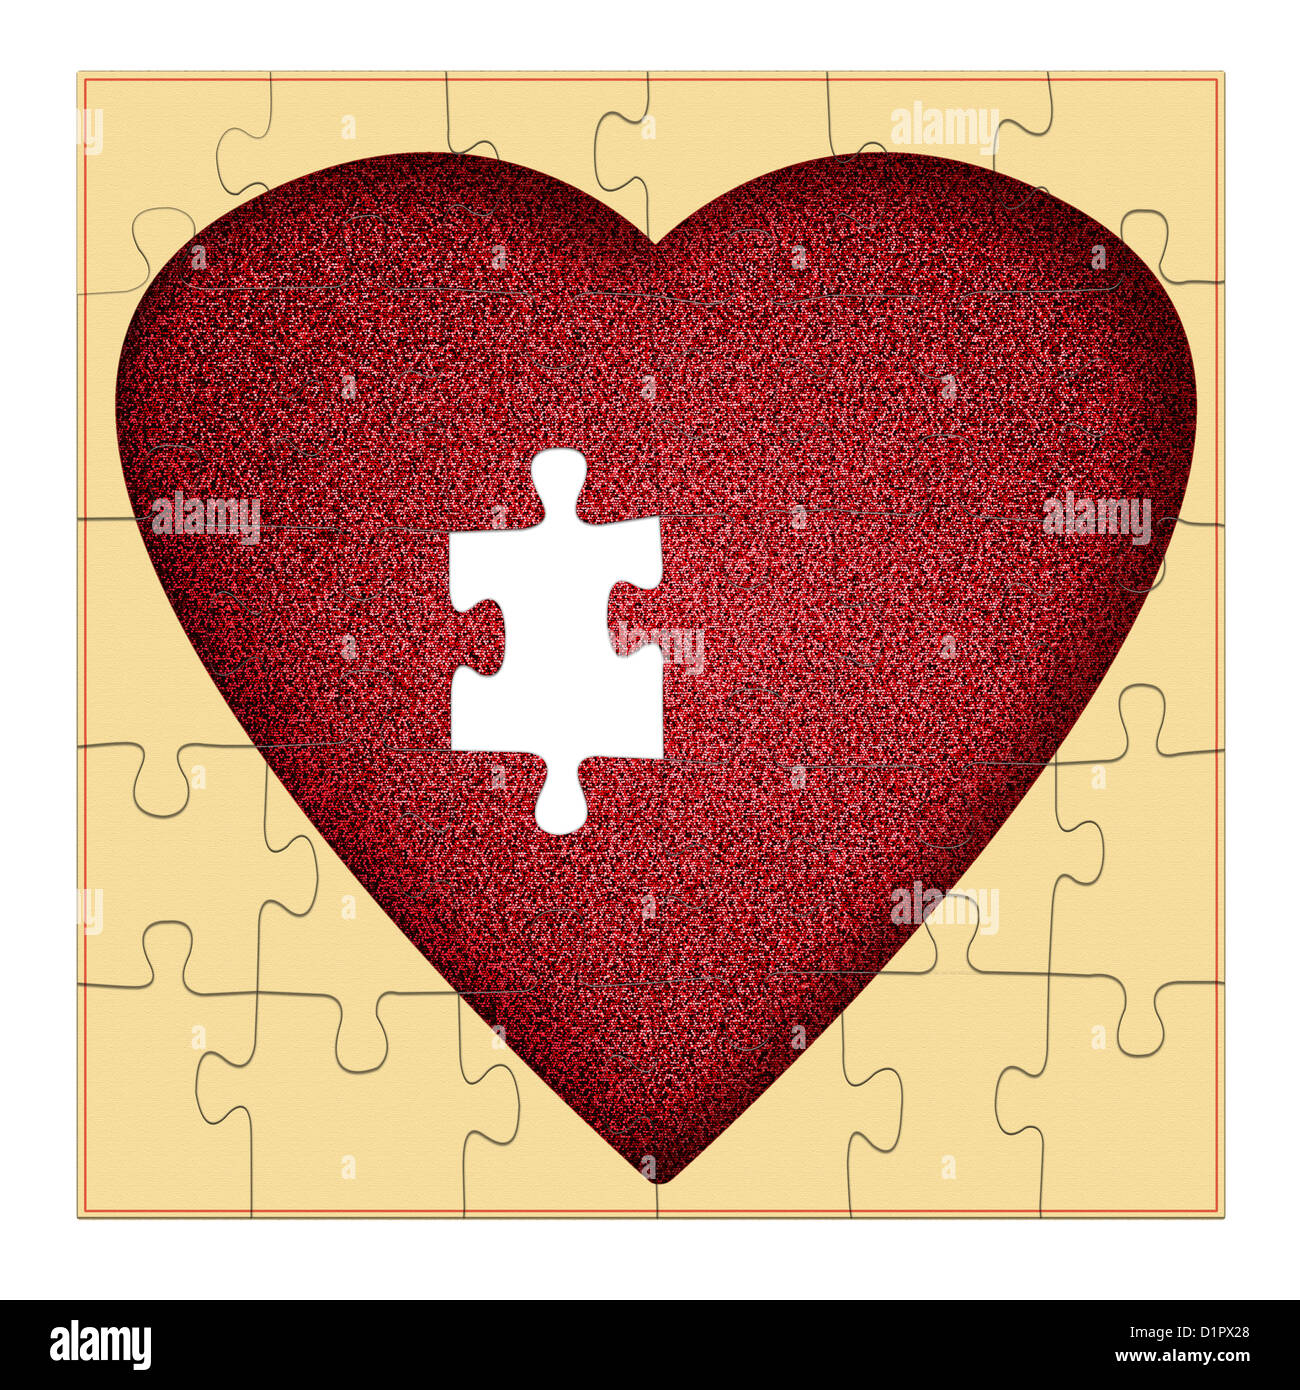 Key part of this heart jigsaw missing - perfect partner wanted concept Stock Photo